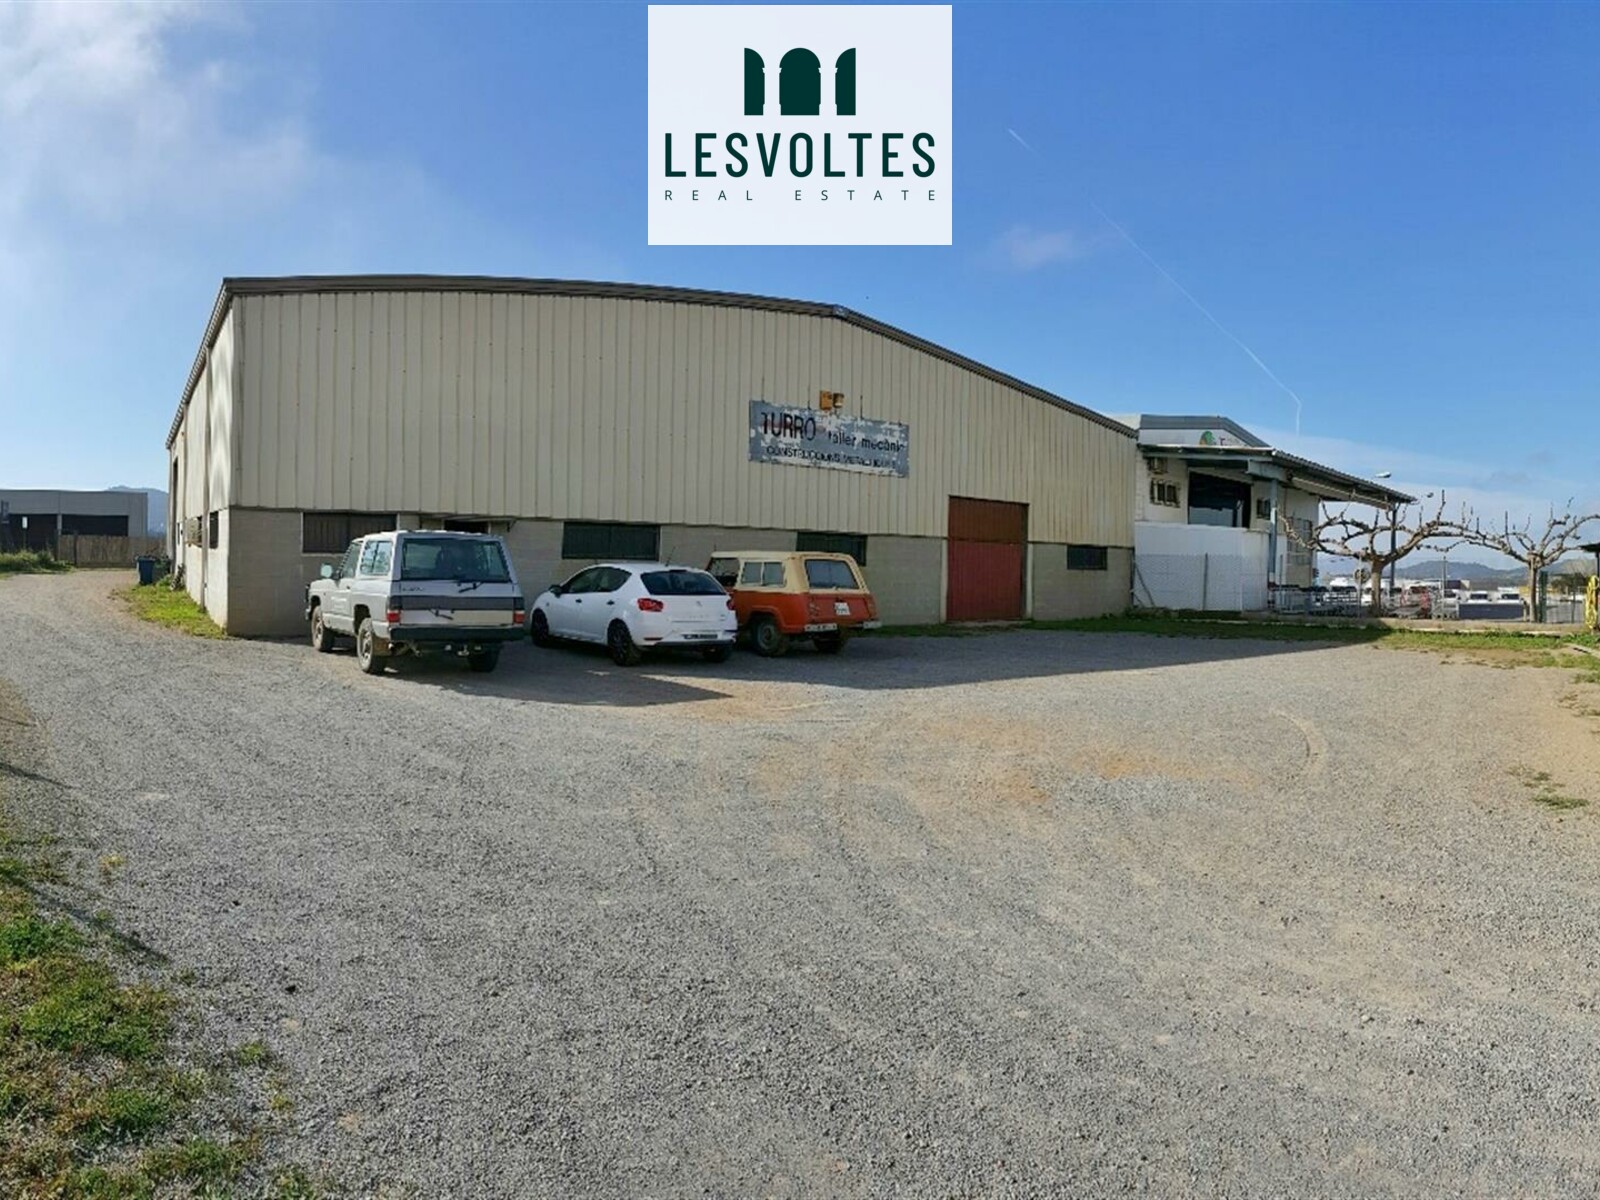 LARGE INDUSTRIAL WAREHOUSE ON THE ROAD OF 740 M2 ON A PLOT OF 1,360 M2. LOTS OF VISIBILITY